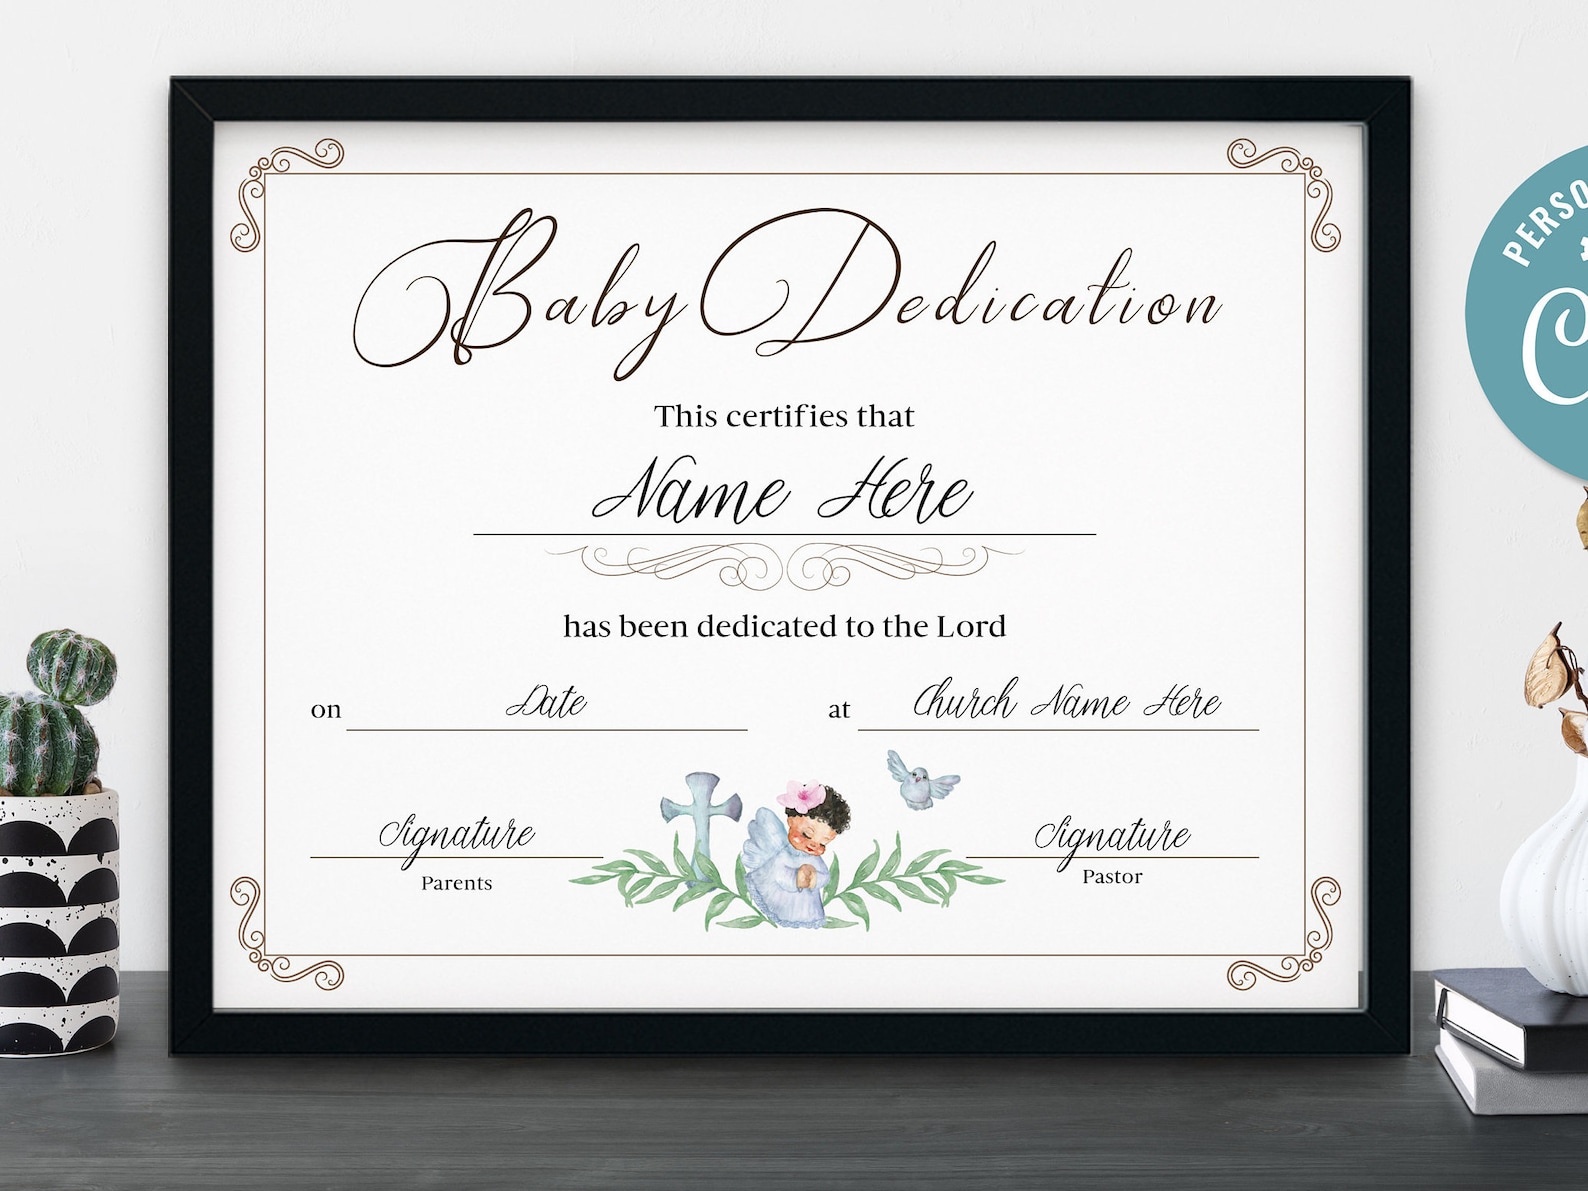 How To Make A Baby Dedication Certificate